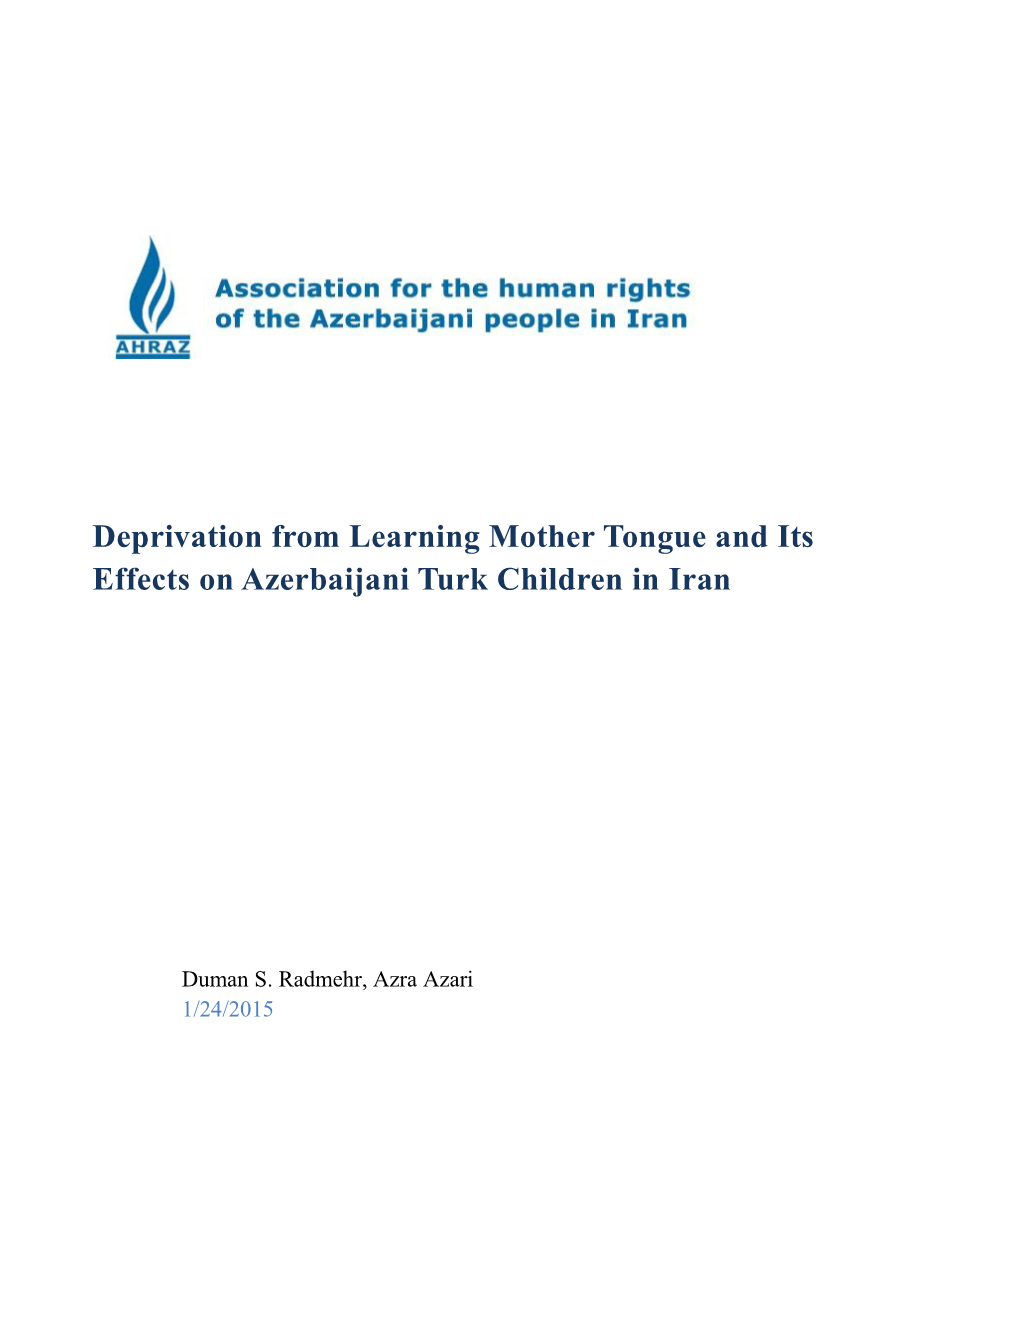 Deprivation from Learning Mother Tongue and Its Effects on Azerbaijani Turk Children in Iran